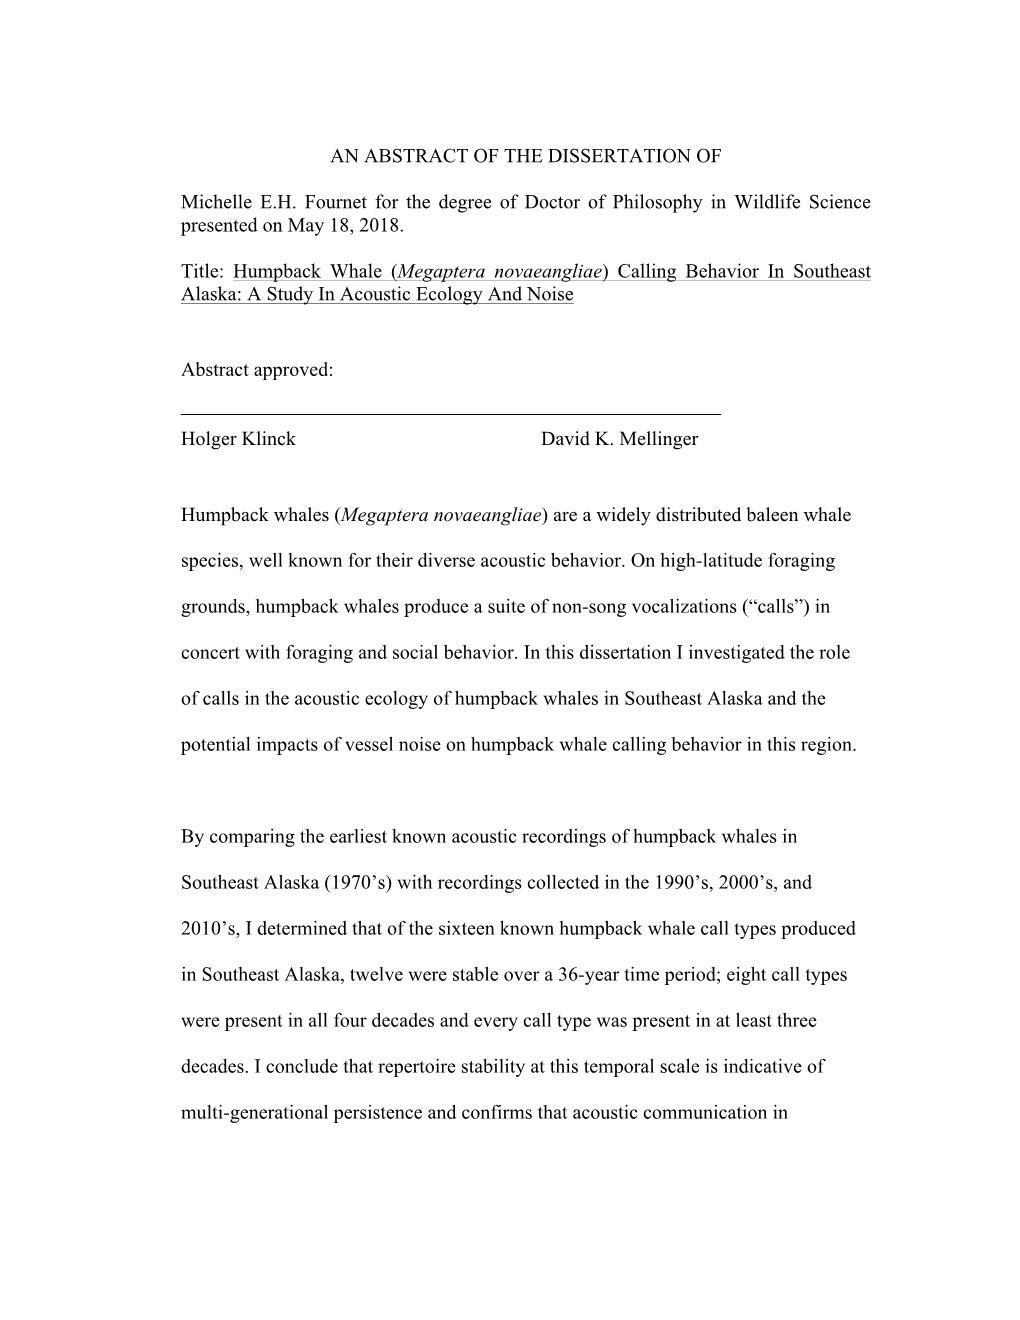 AN ABSTRACT of the DISSERTATION of Michelle E.H